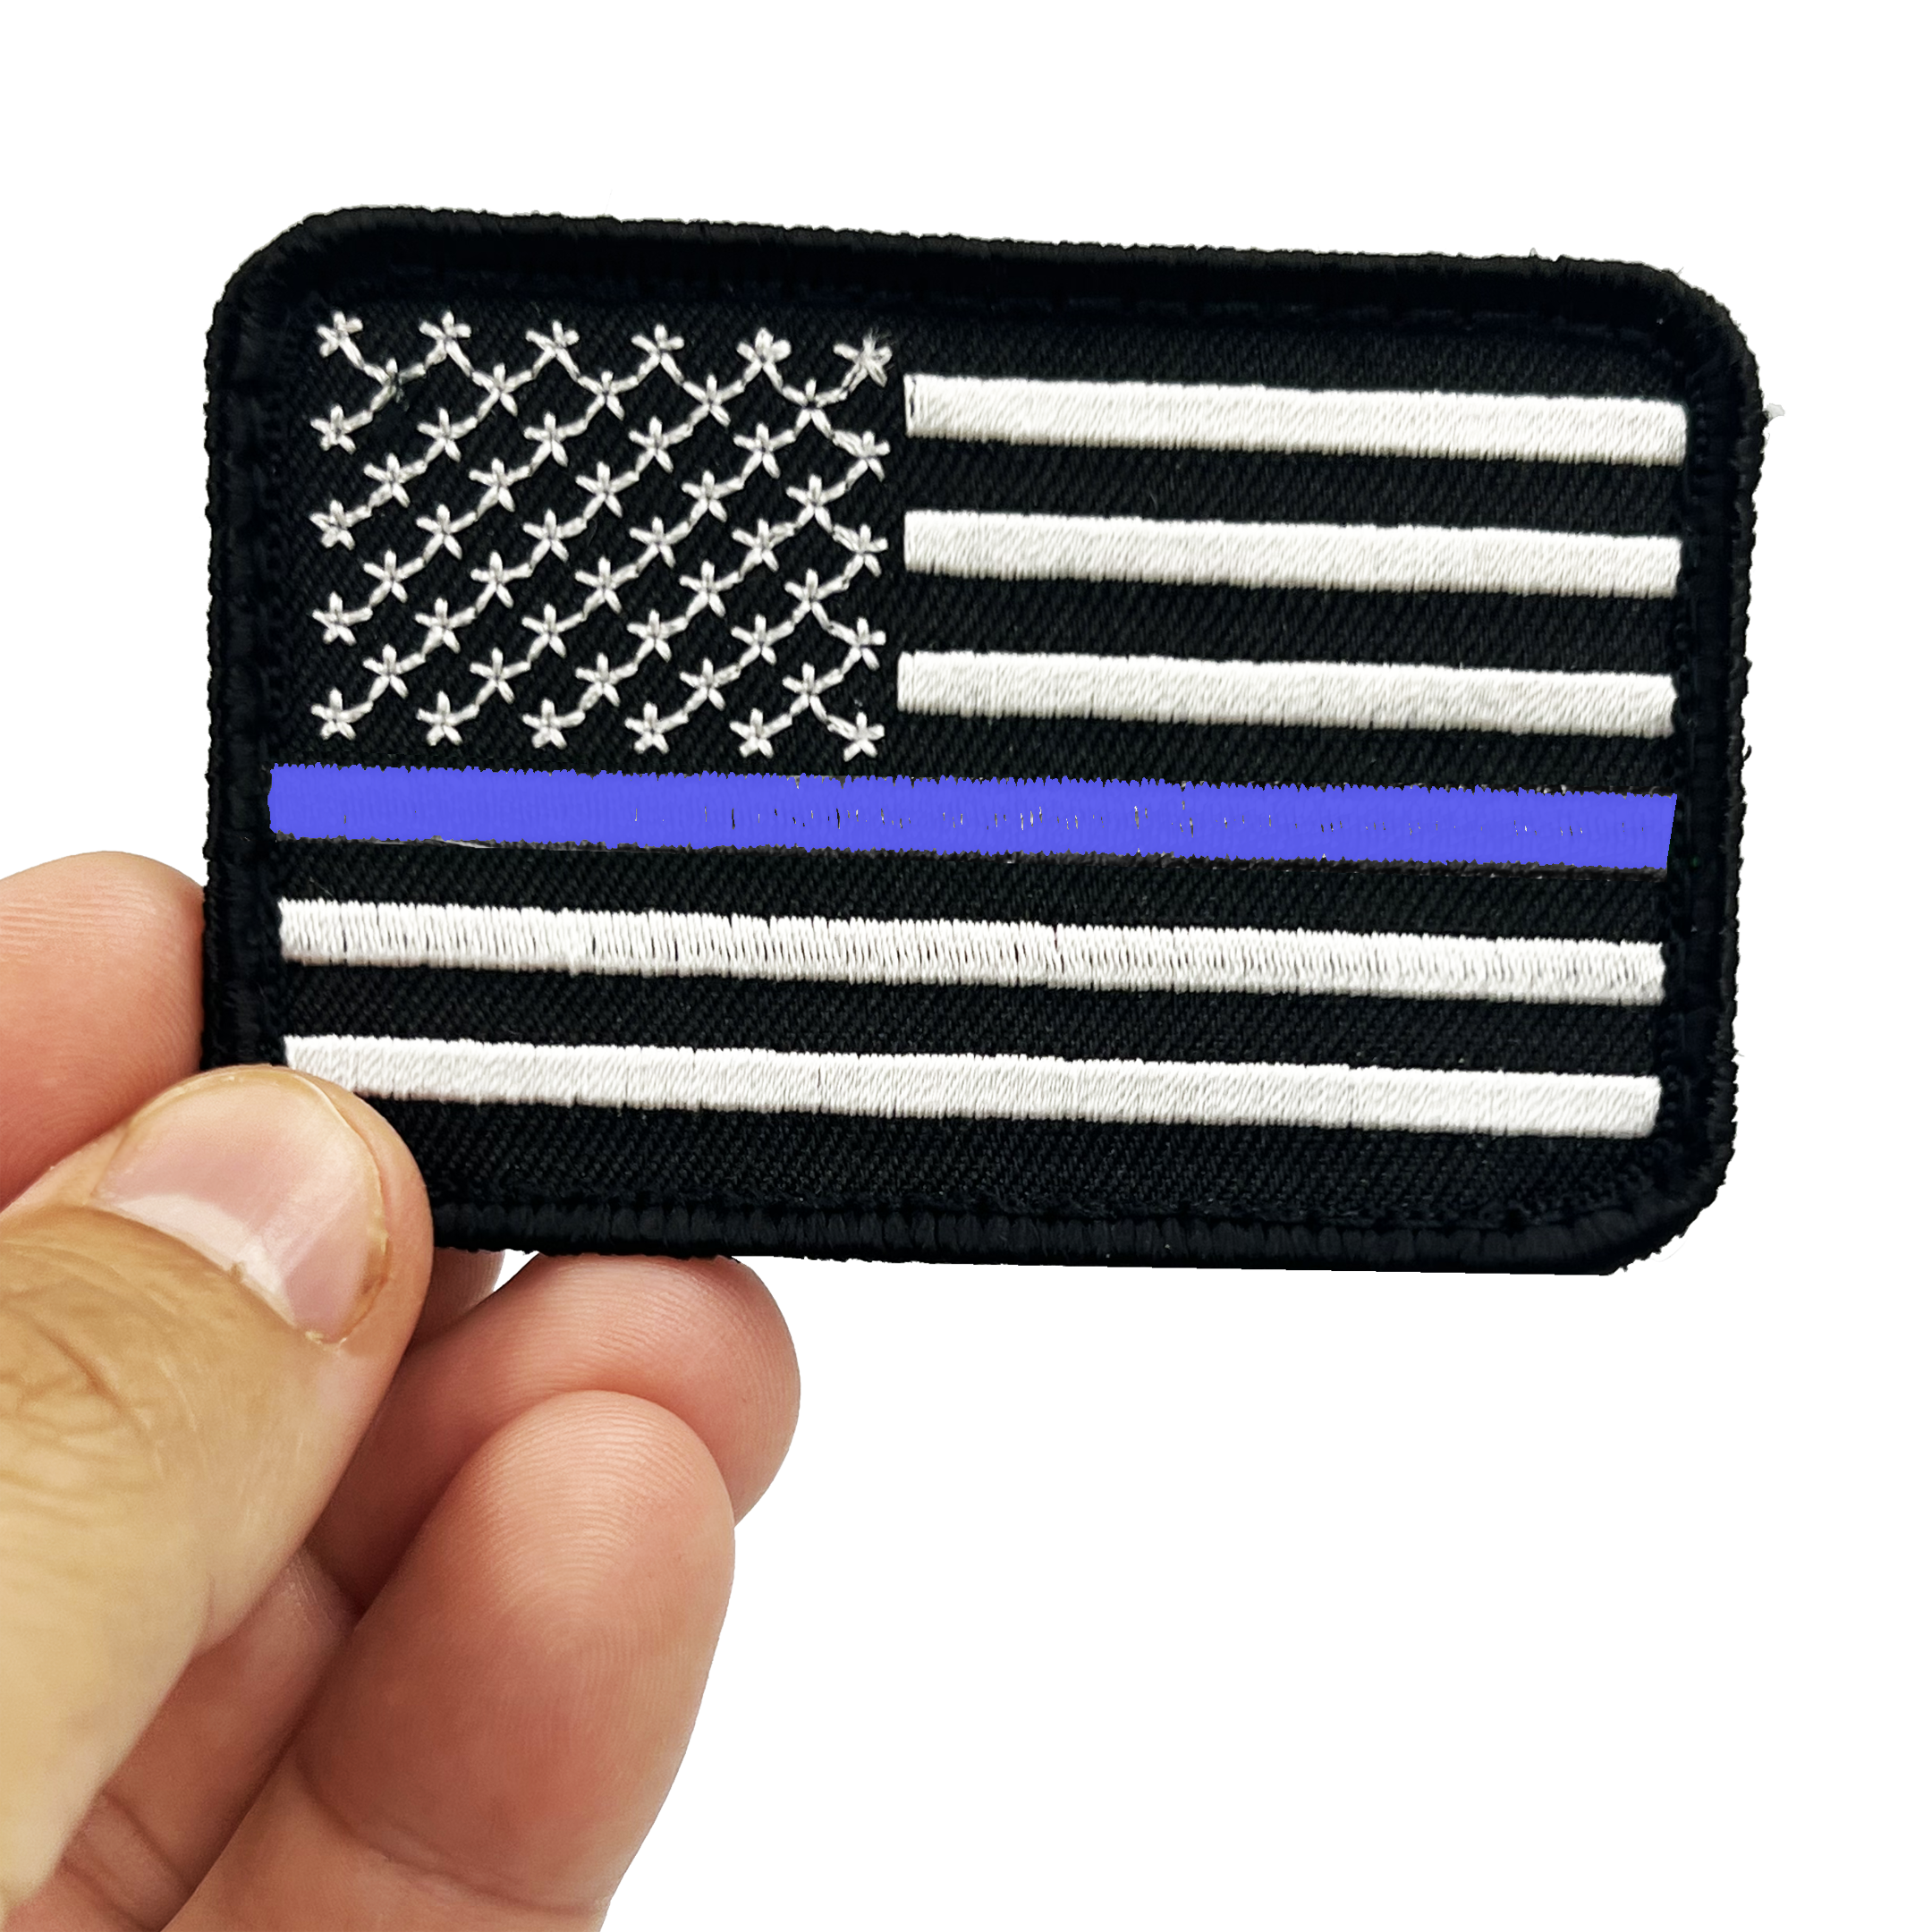 EL12-019 Thin Blue Line Police Subdued American Flag Patch with hook and loop back embroidered